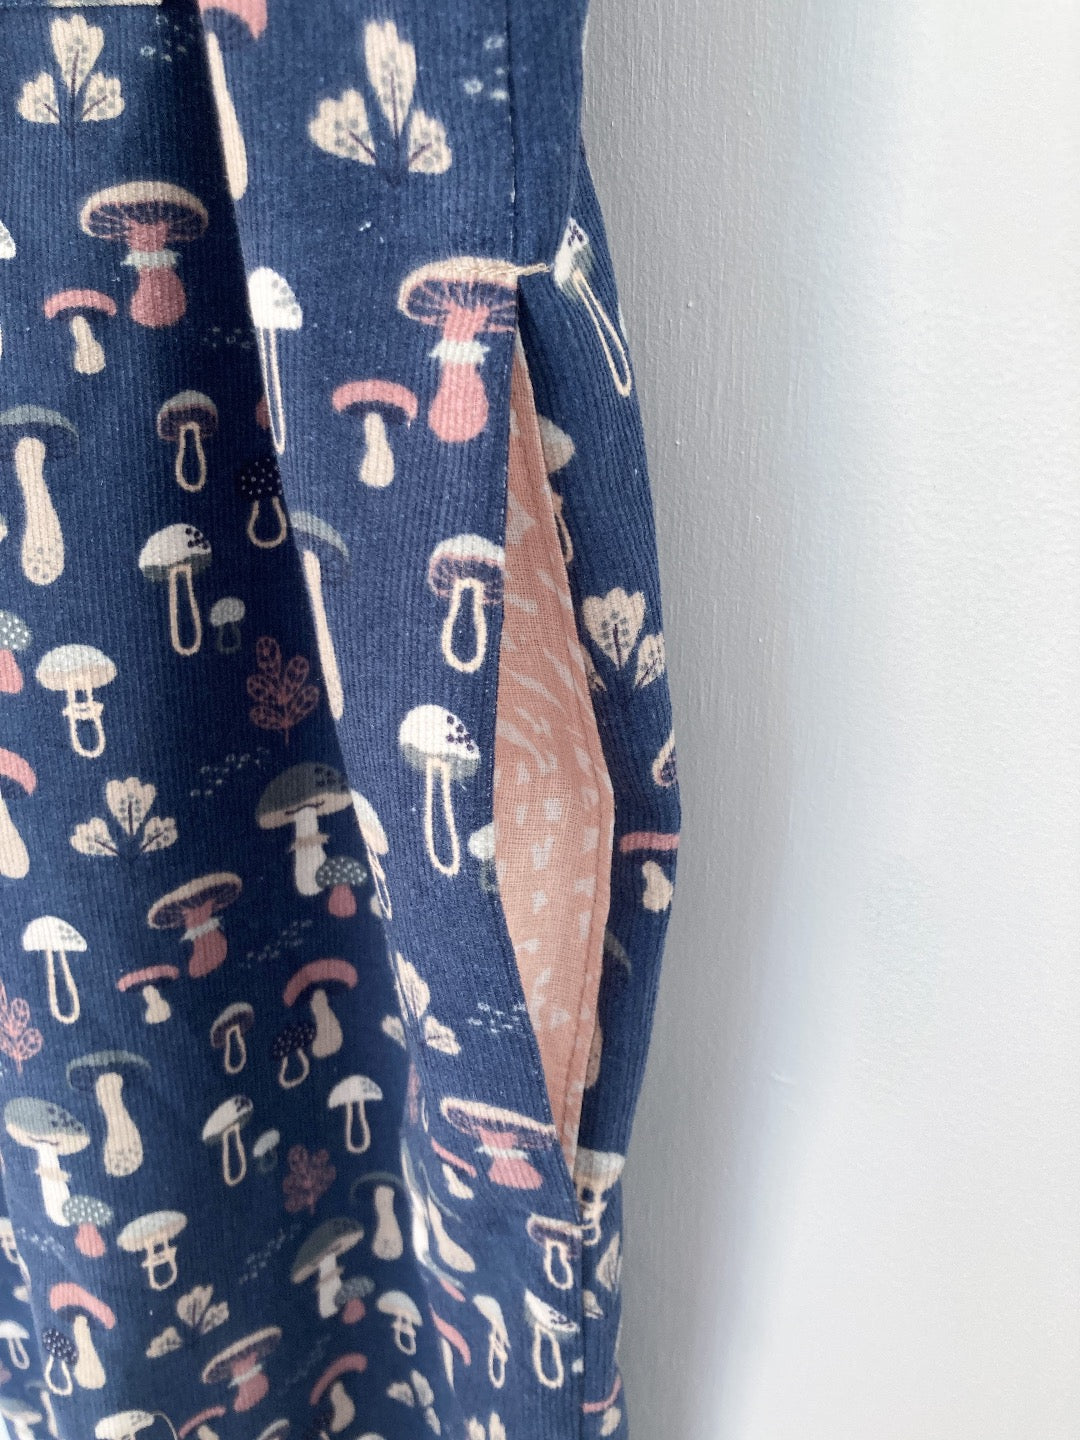 Cotton corduroy mushroom dungarees in blue pink and cream with cute pink inseam pockets